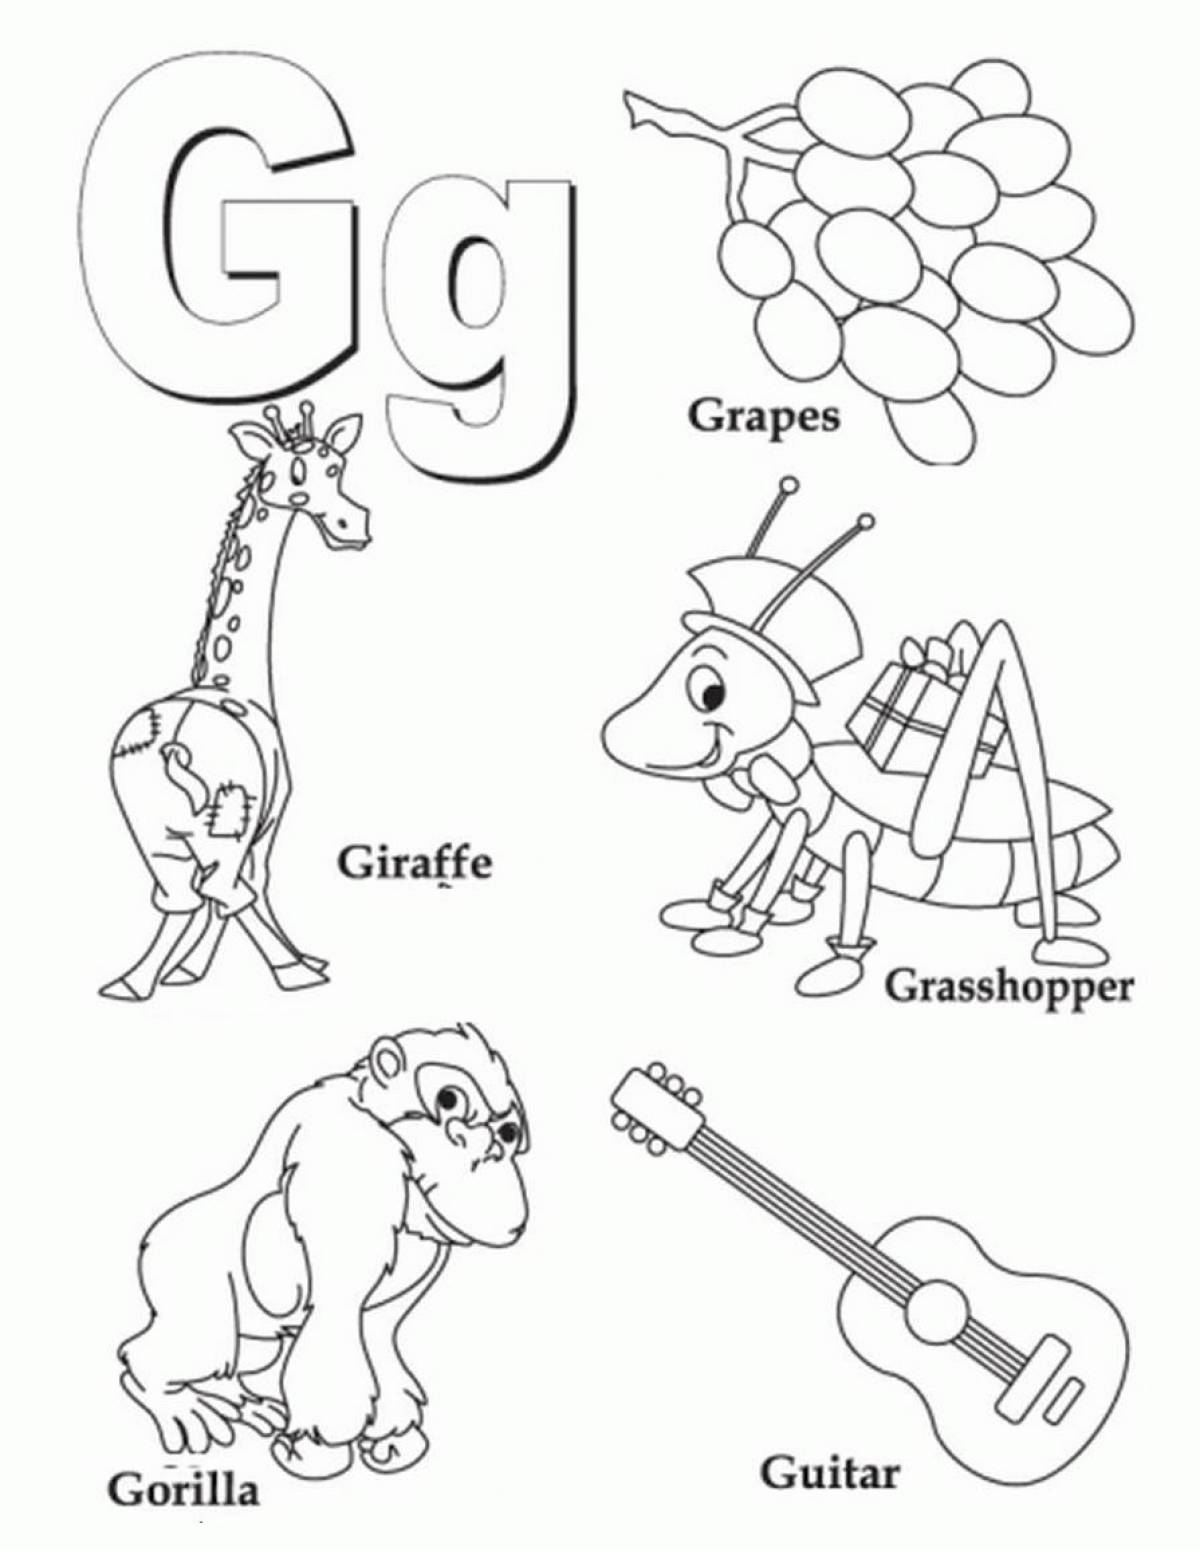 Cute english alphabet coloring page